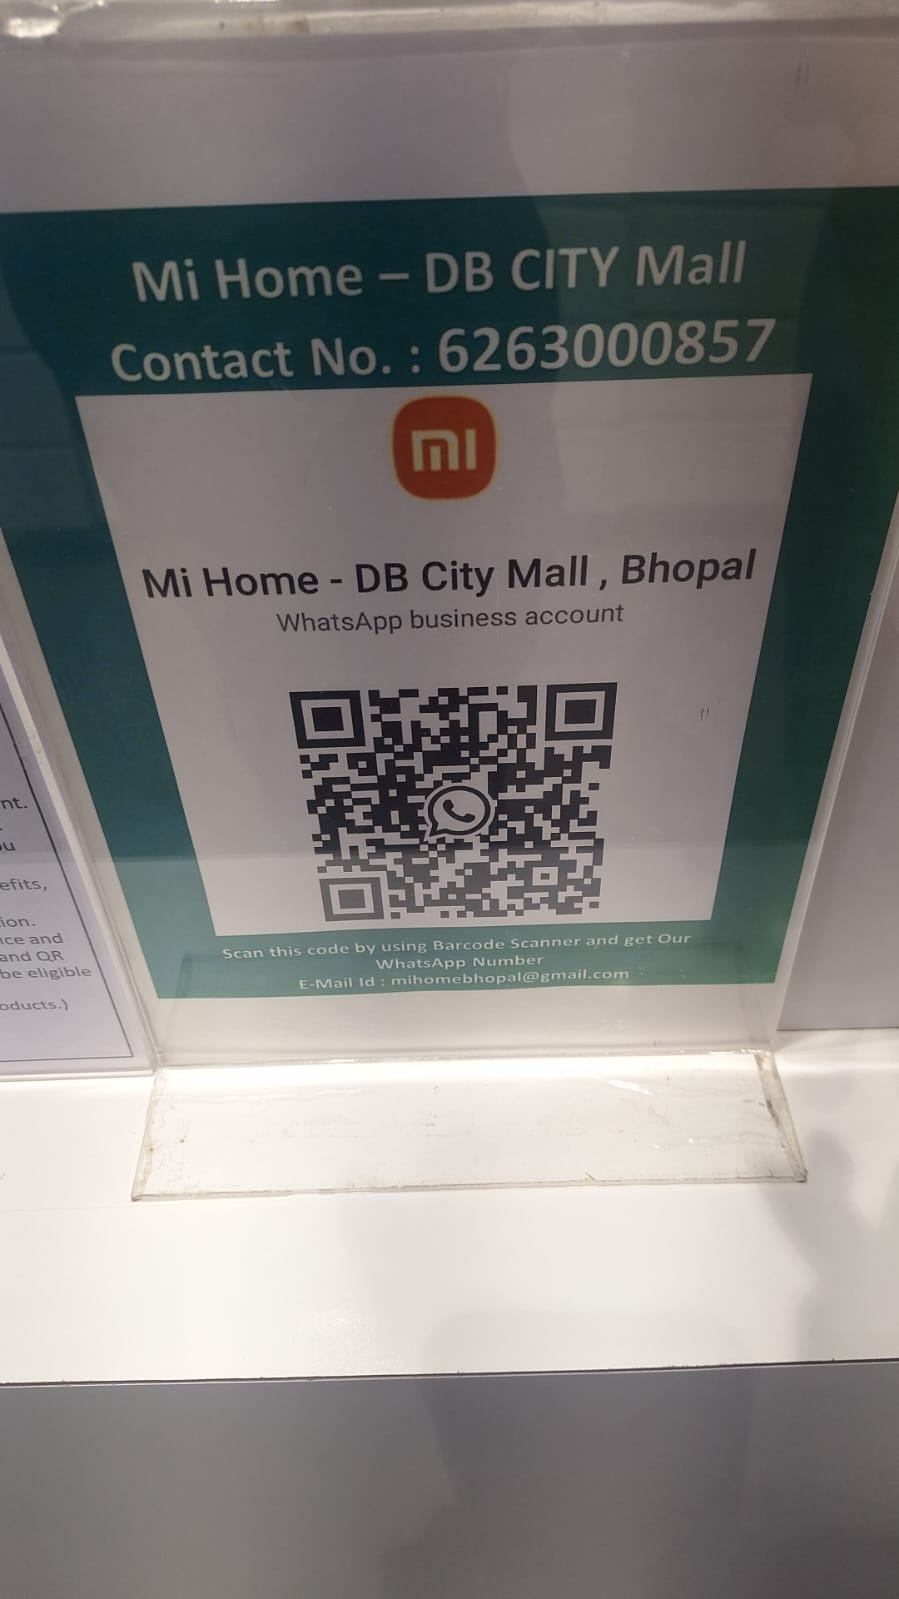 Special Offer @Mi Home- DB CITY MALL, Bhopal